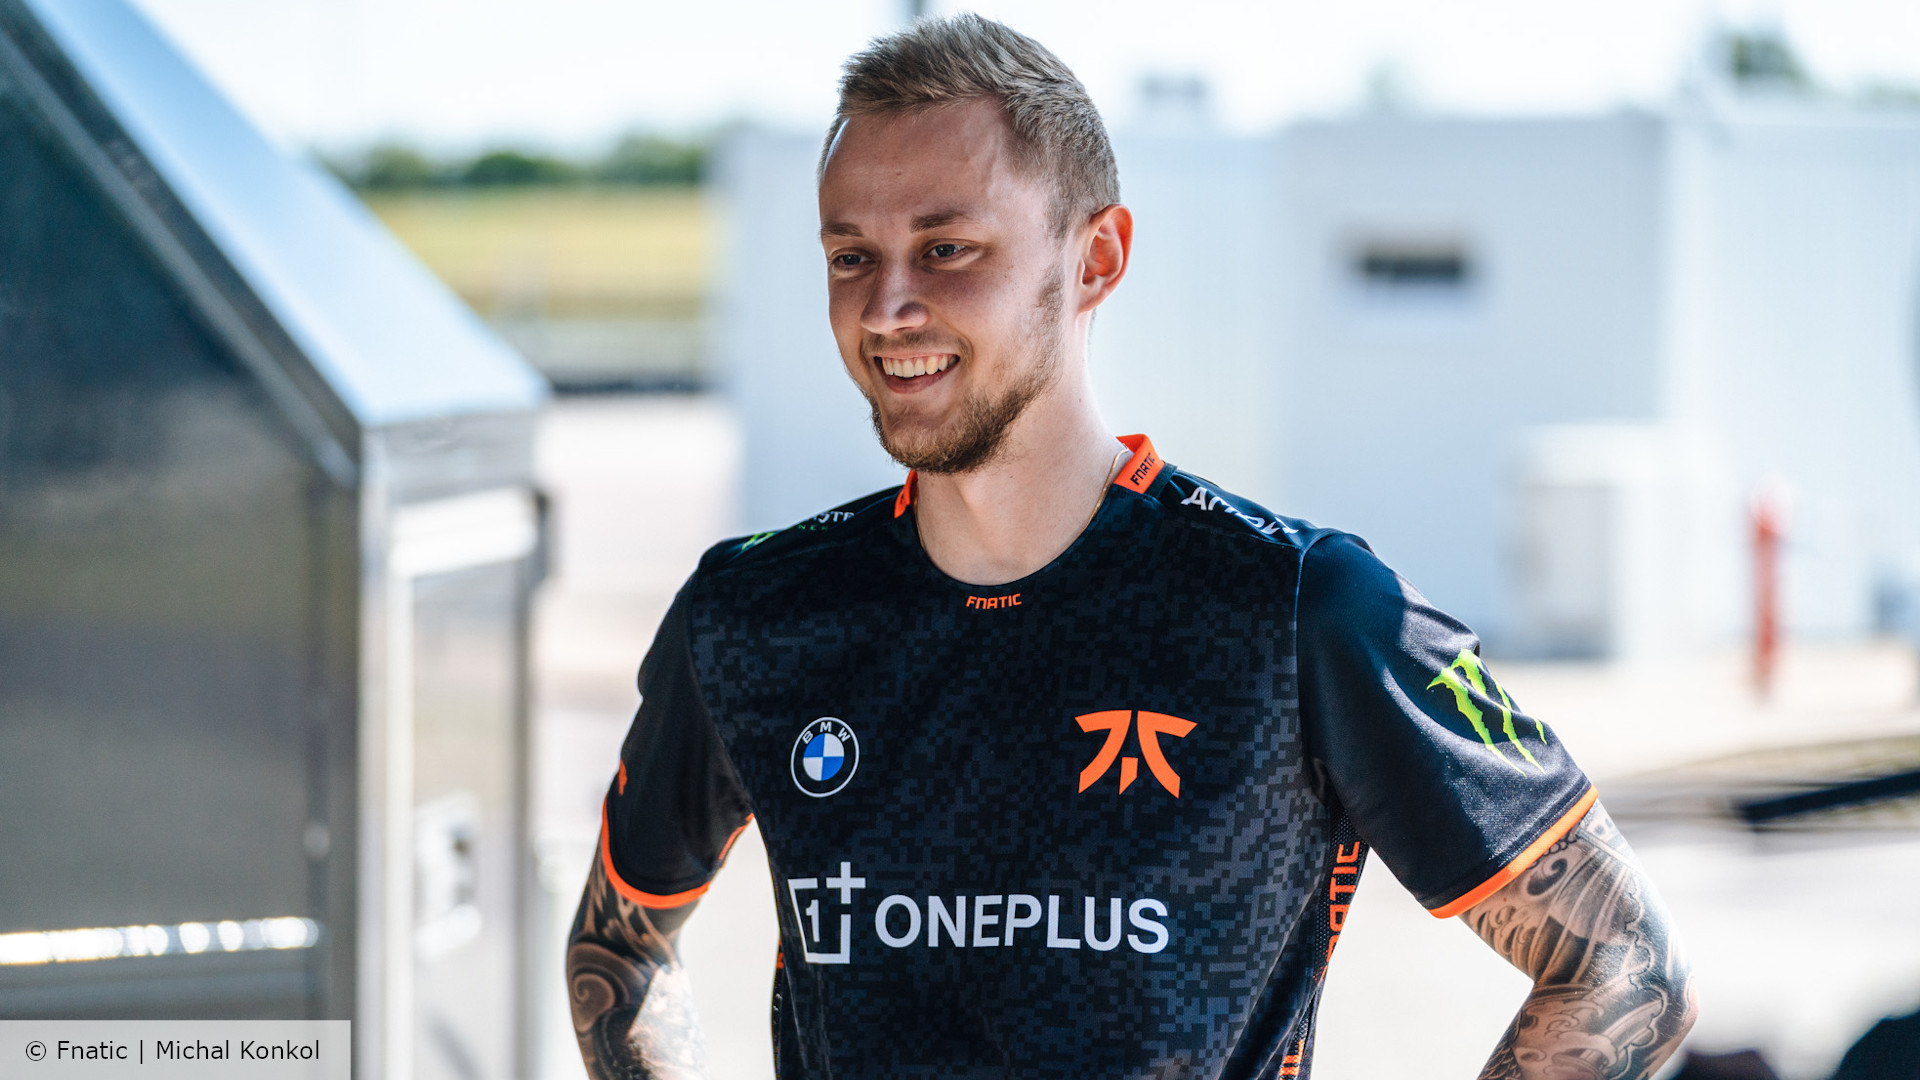 Rekkles says he’s proud that Fnatic overcame its “identity